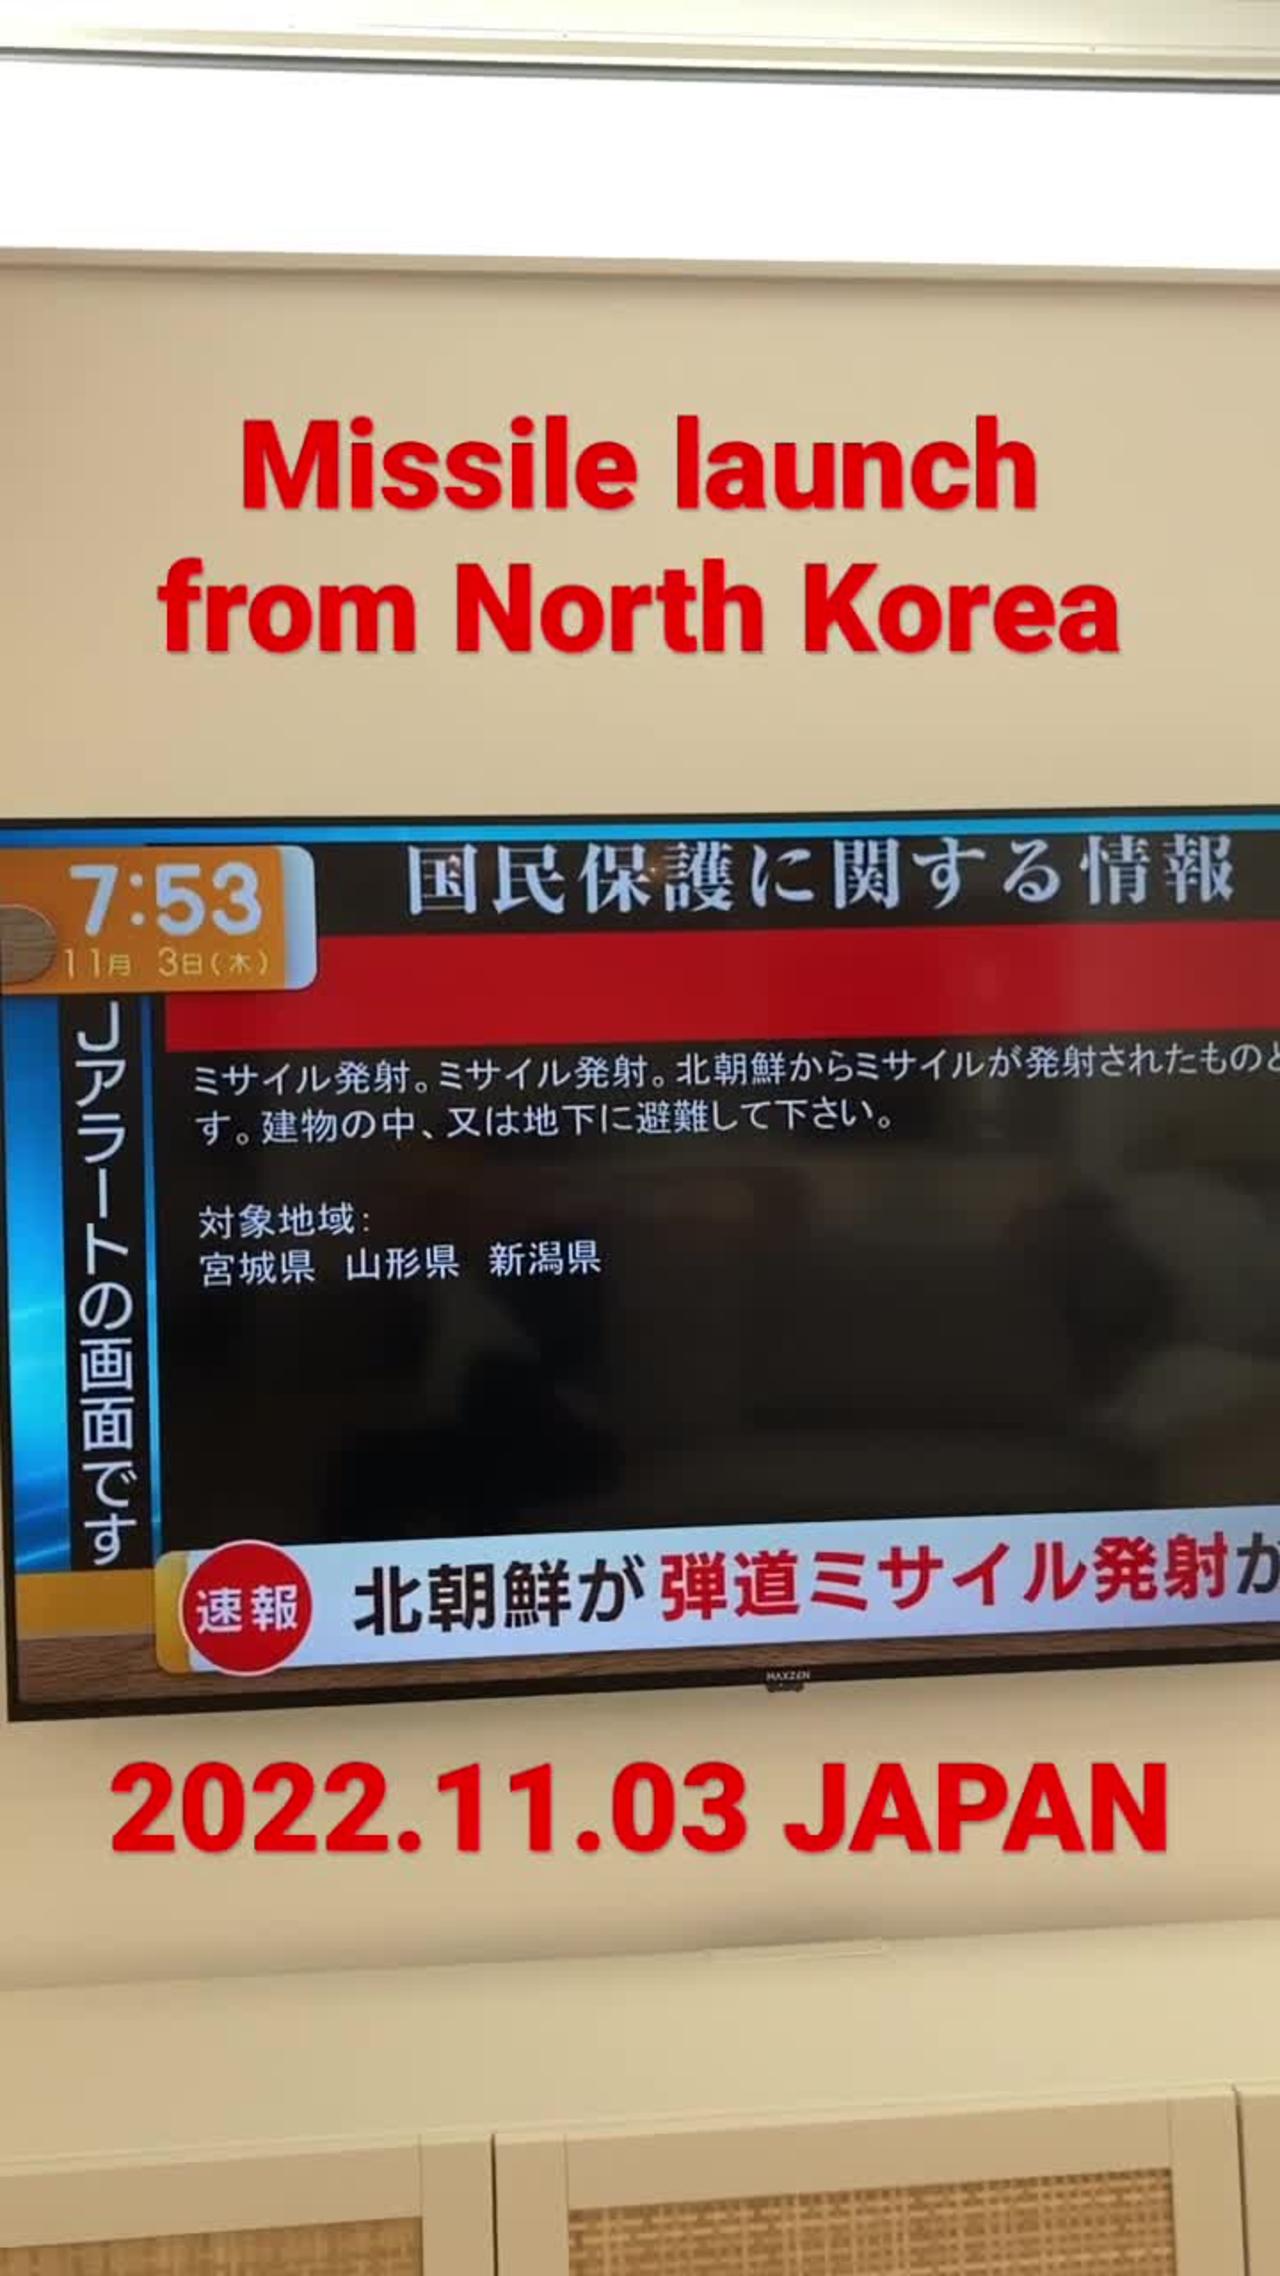 【Breaking news】Missile launch from North Korea #shorts #japan @A STYLE JAPAN TV